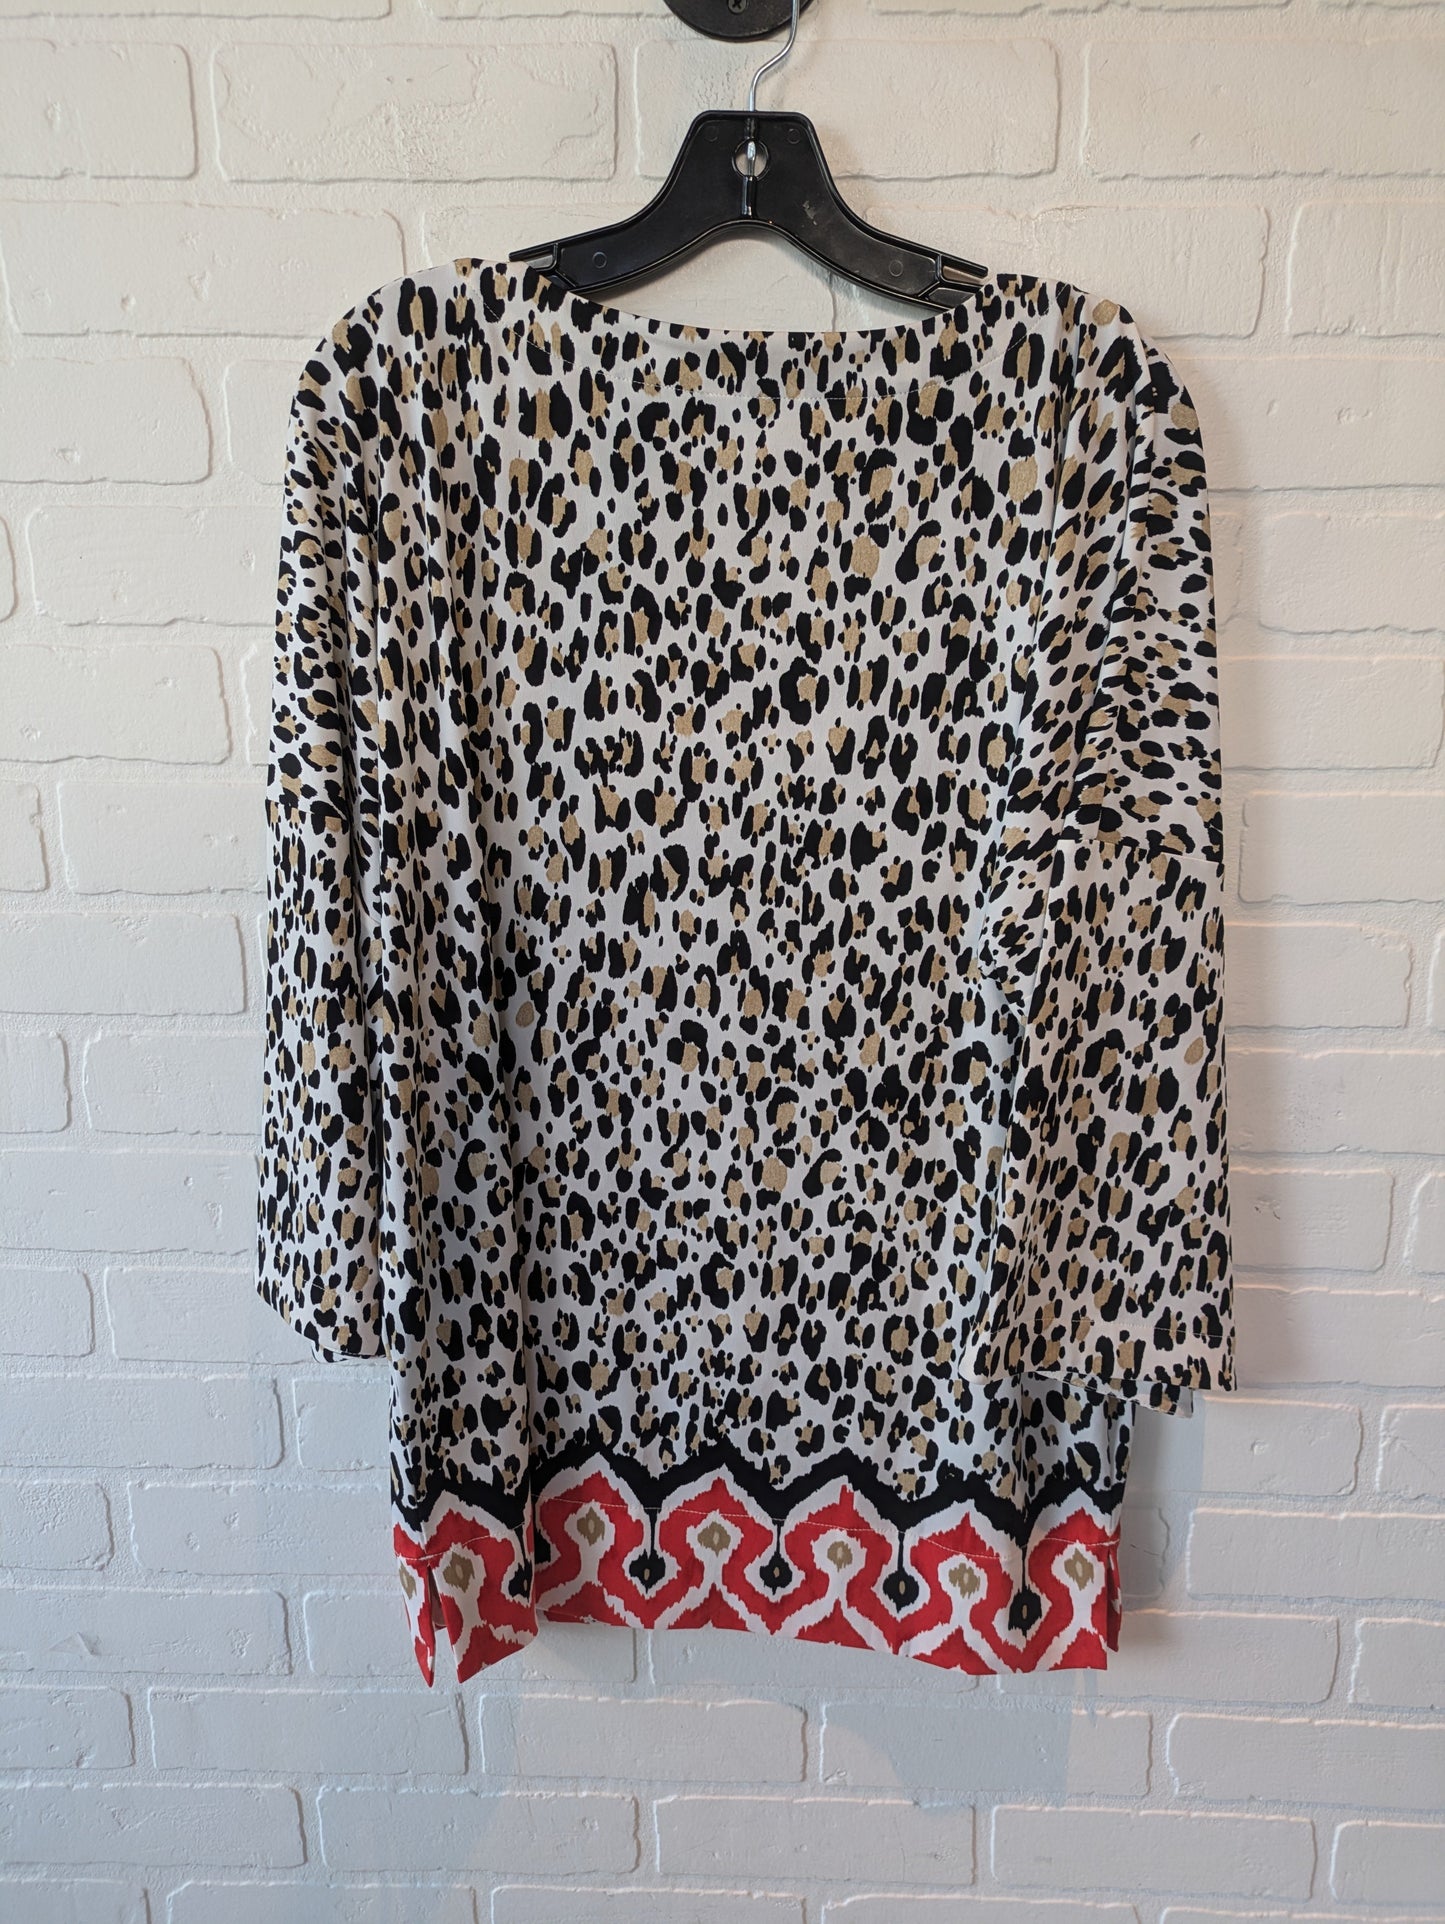 Black & White Top Long Sleeve Chicos, Size M